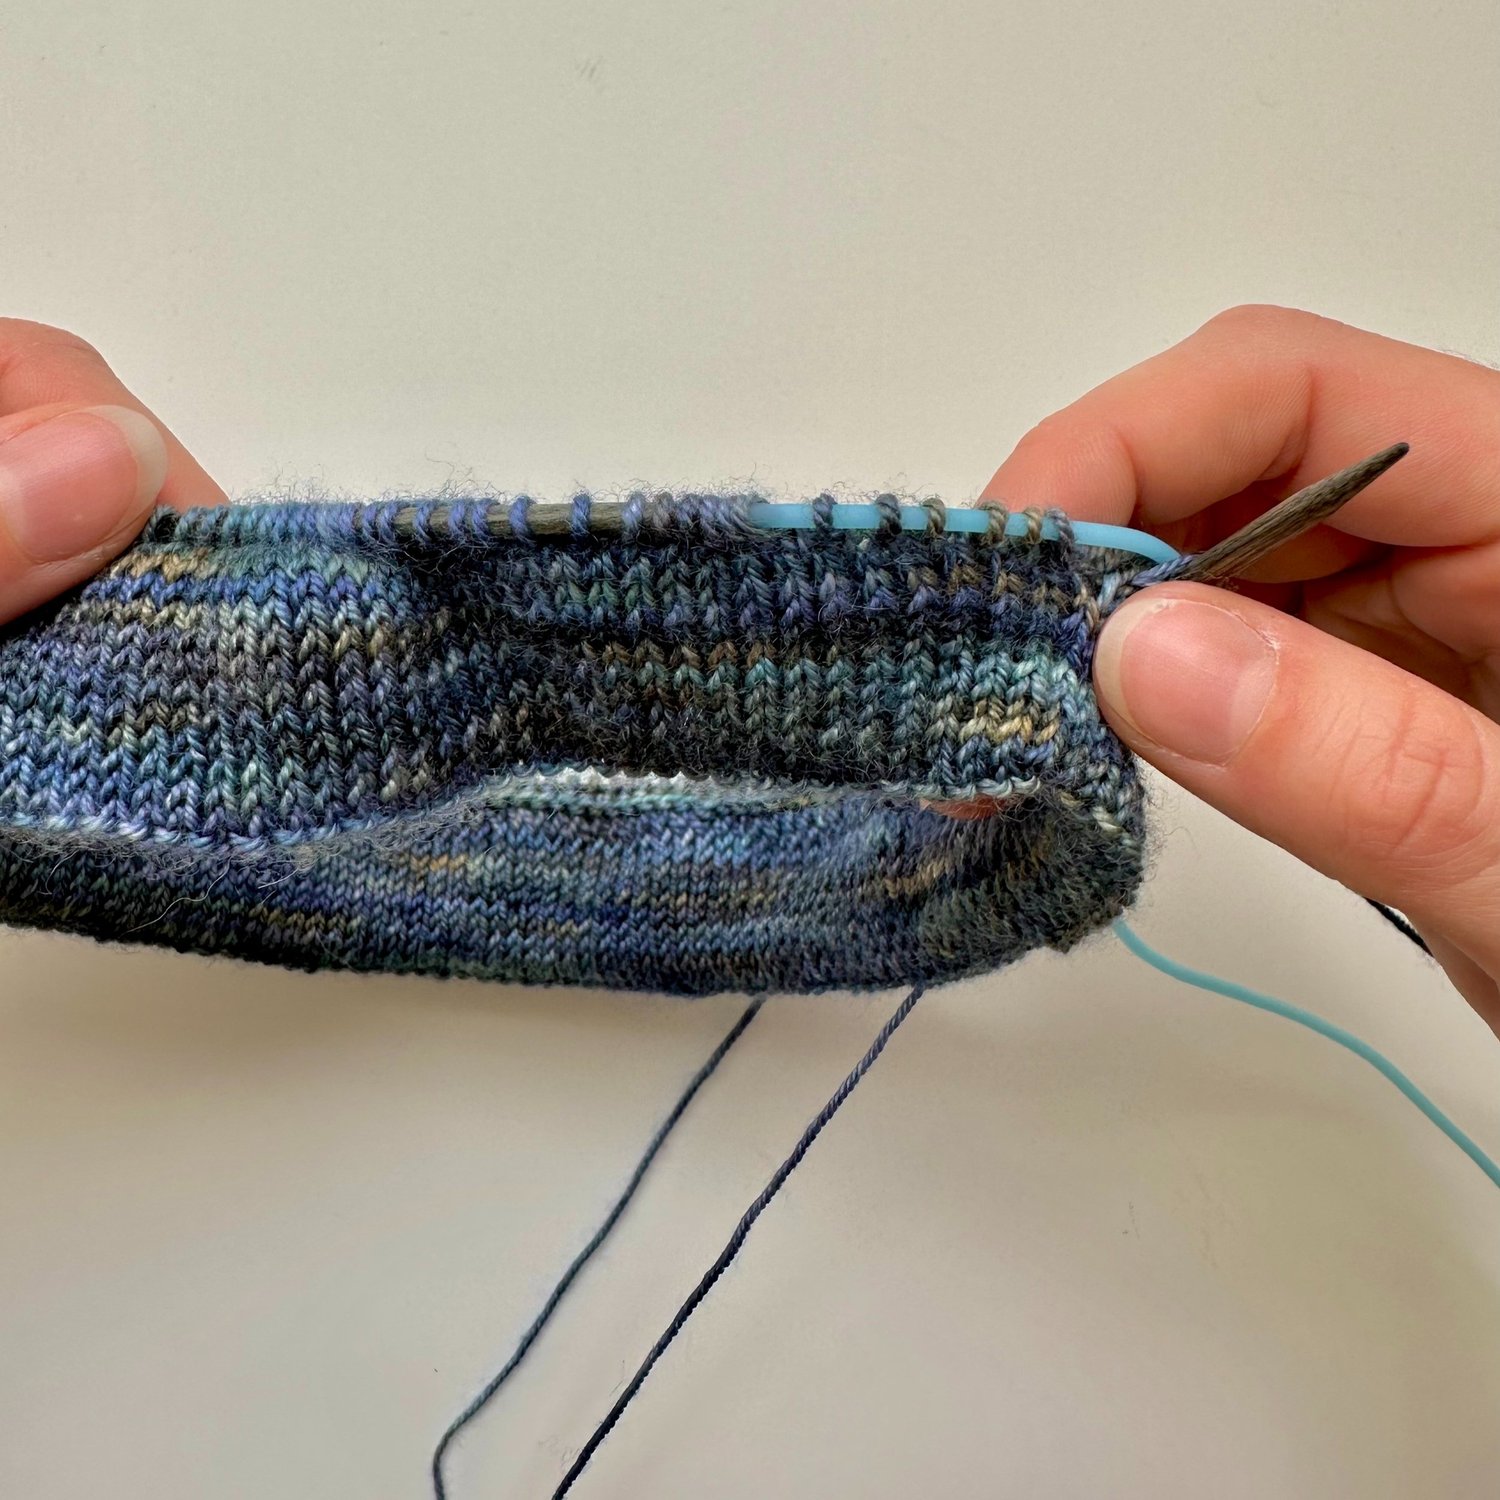 Flexible Stitch Holders For Knitting